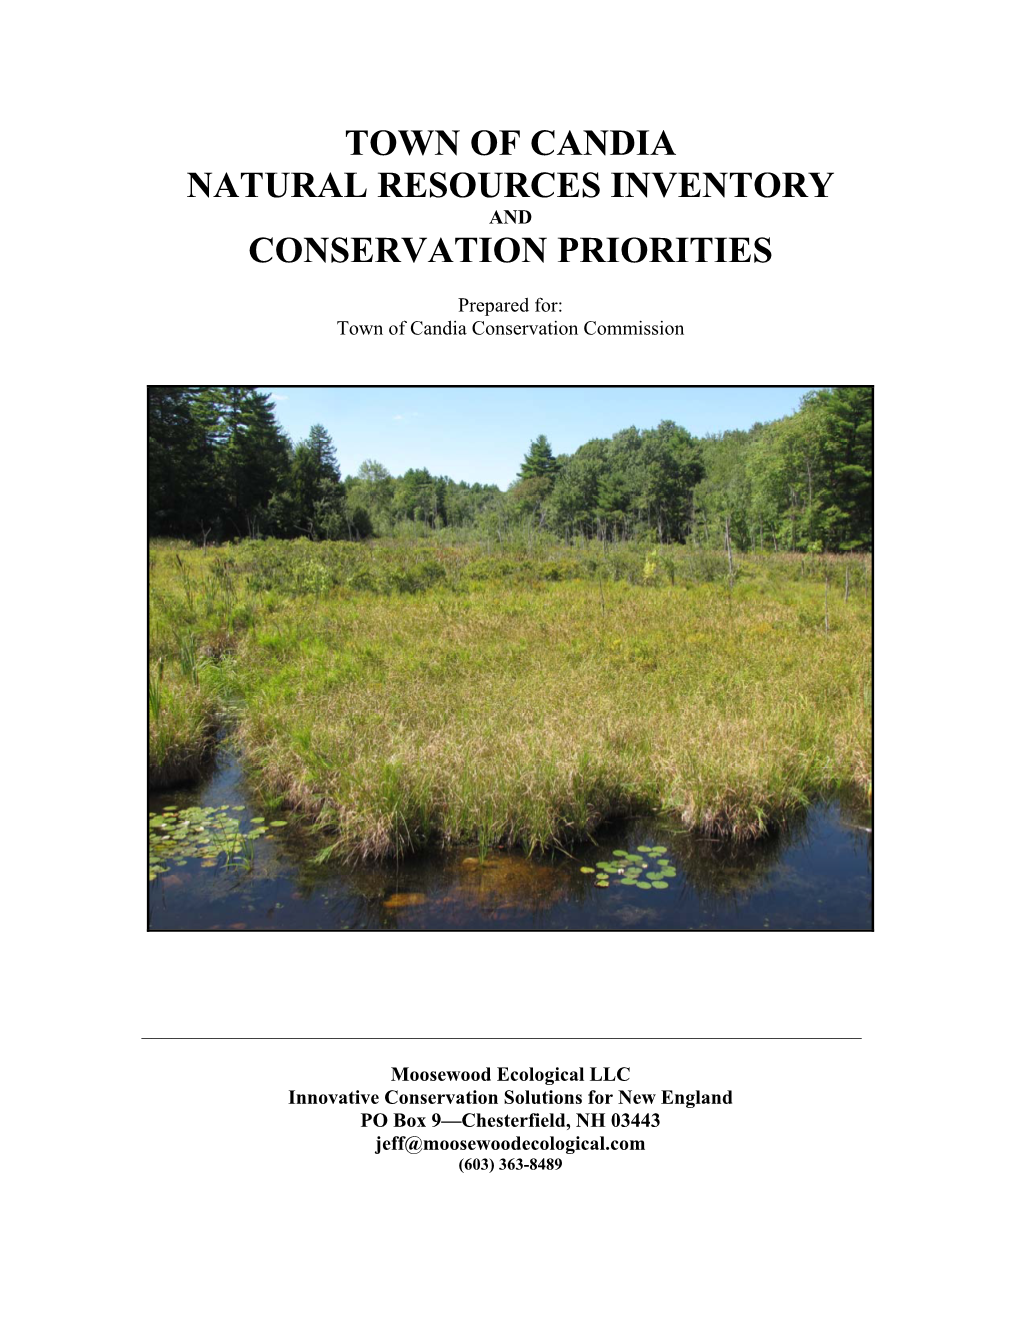 Town of Candia Natural Resources Inventory and Conservation Priorities